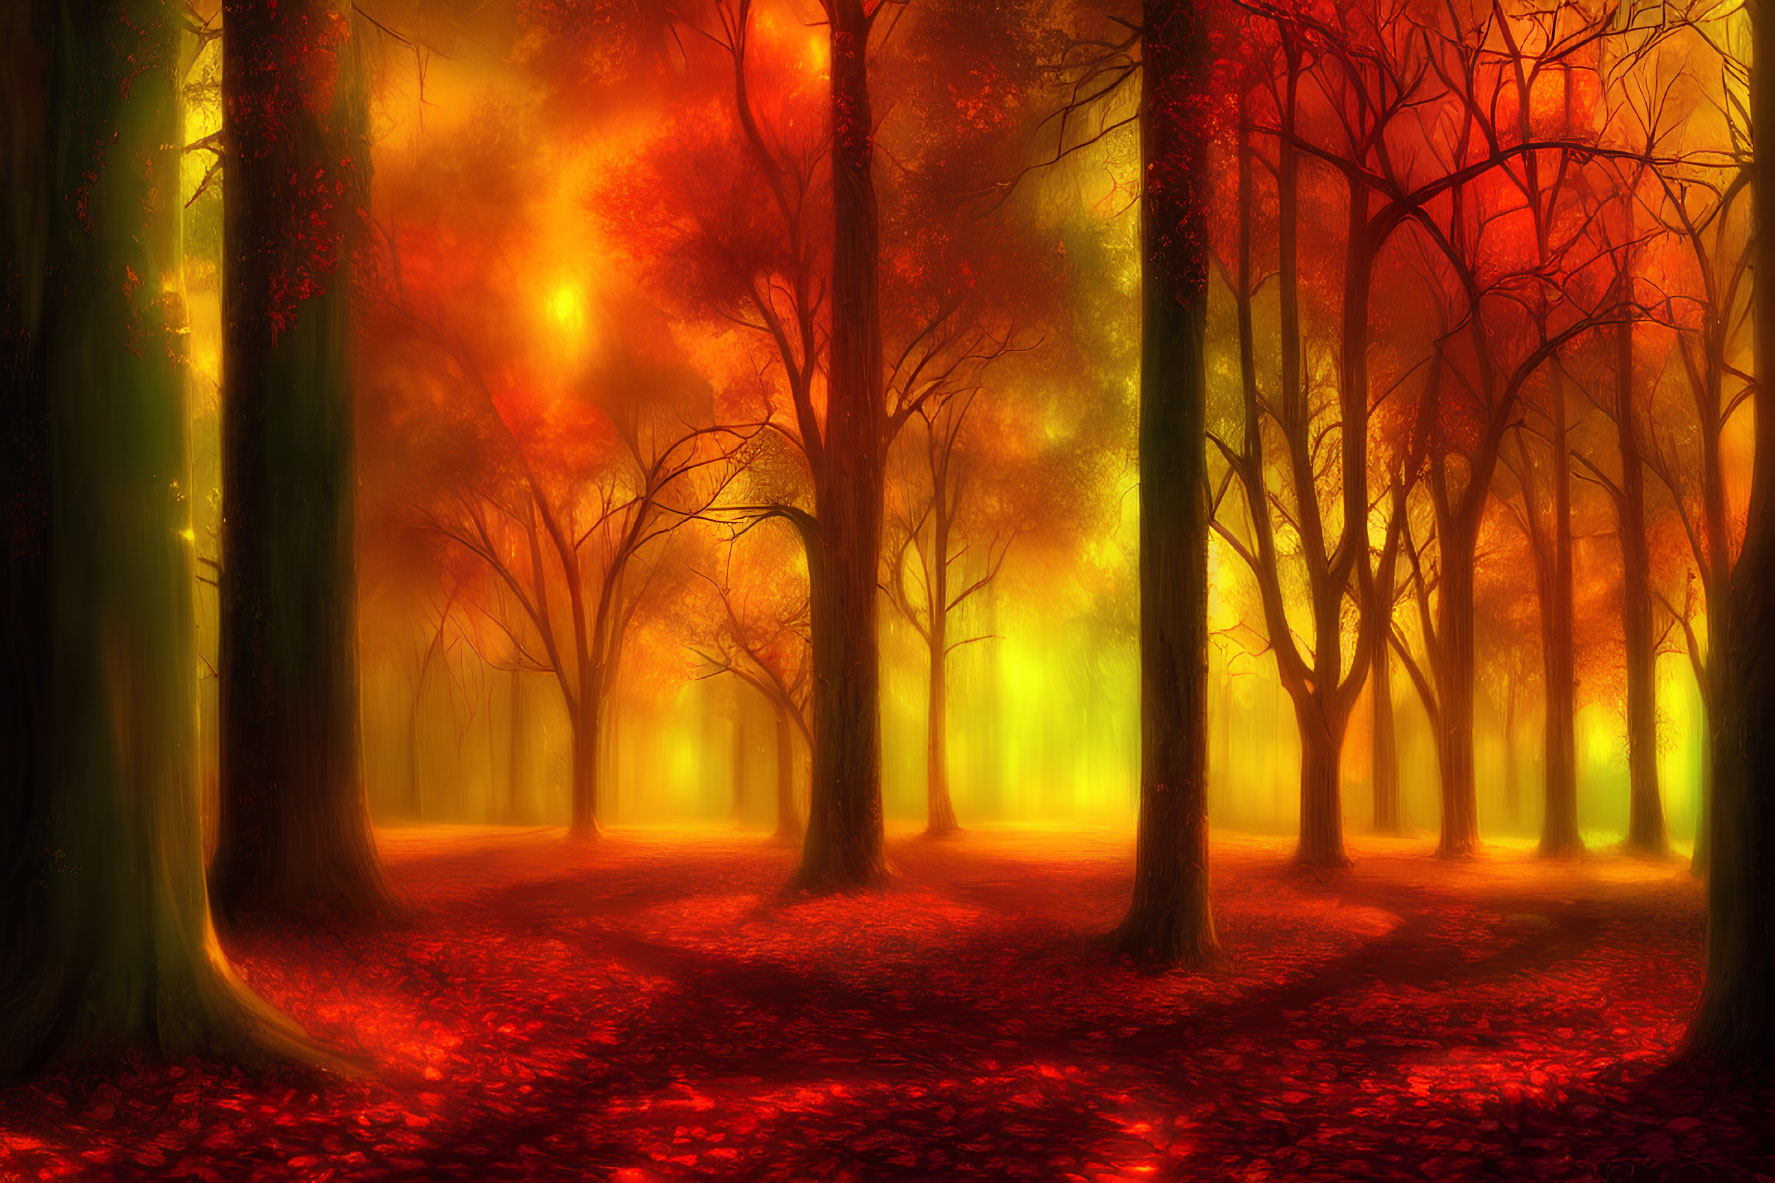 Vibrant red and orange autumn forest with golden light filtering through trees